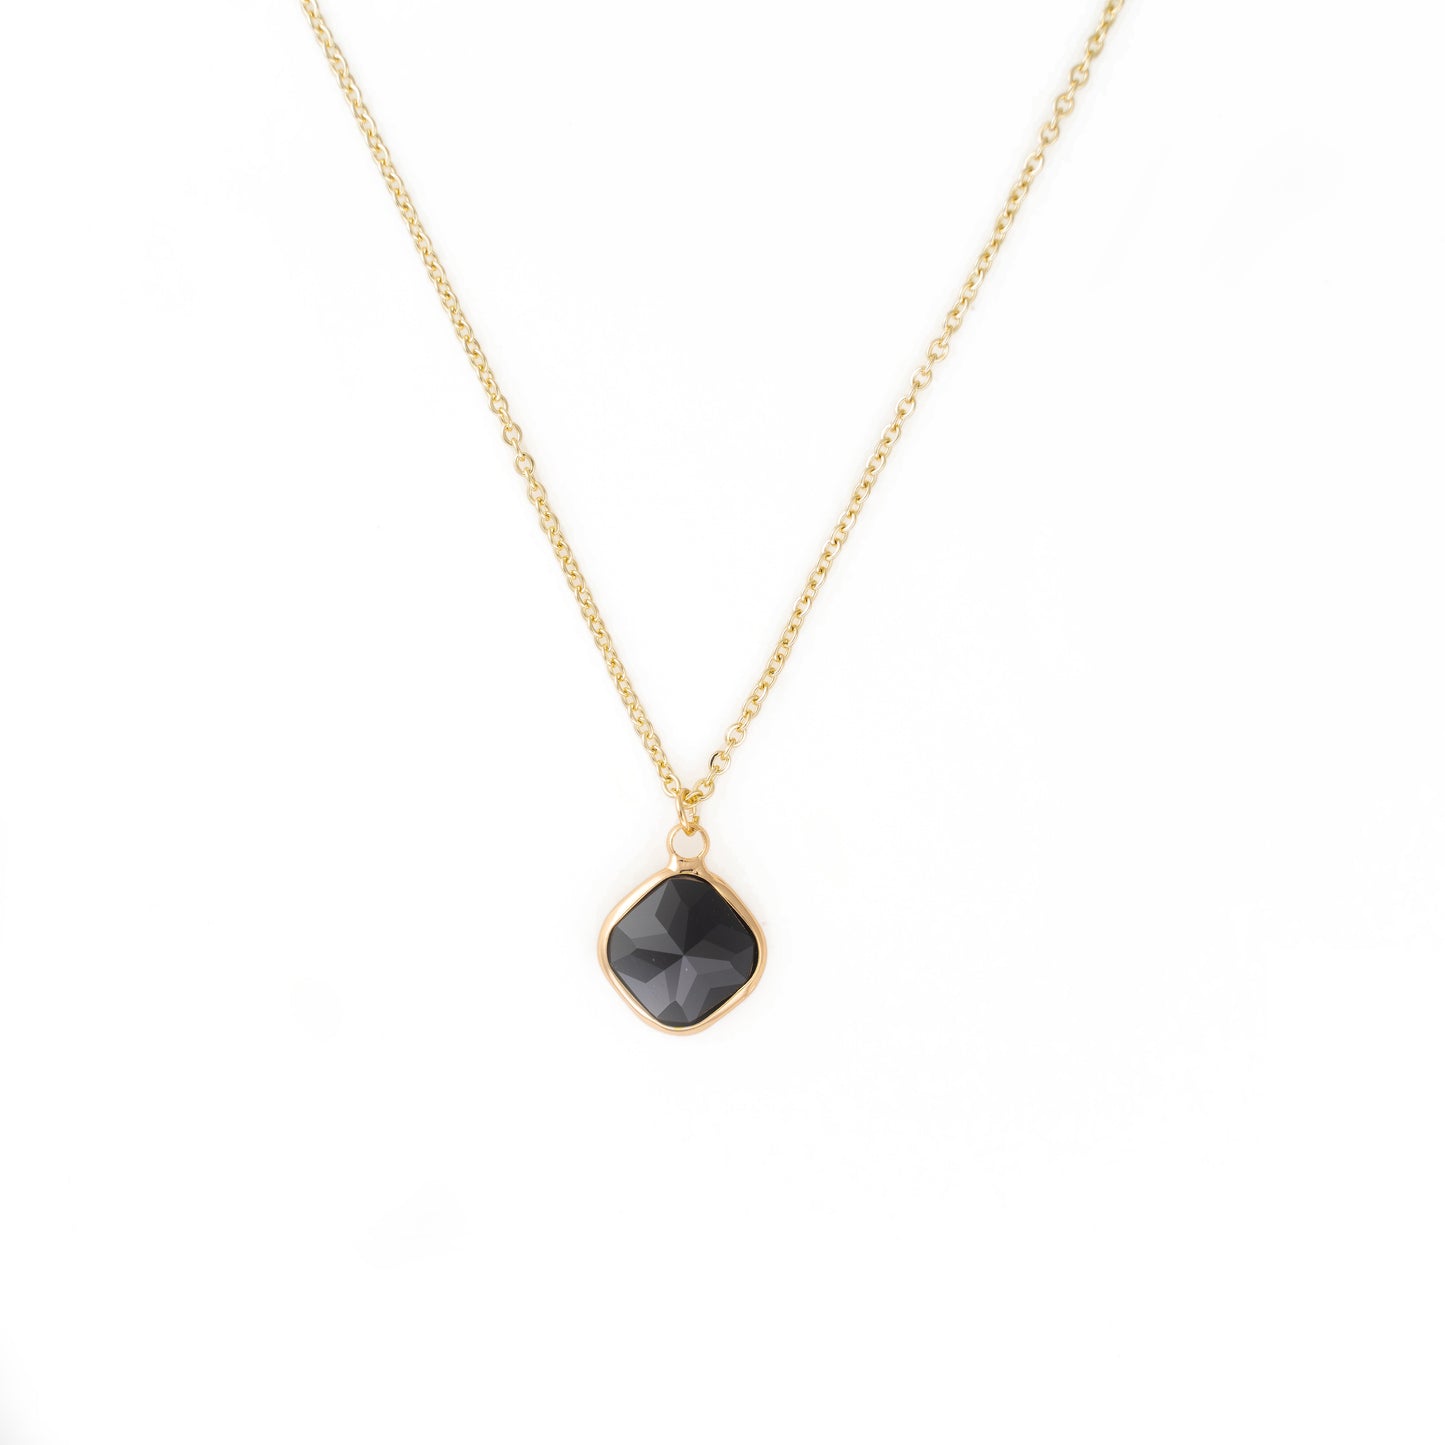 Gold plated necklace "Black eye"